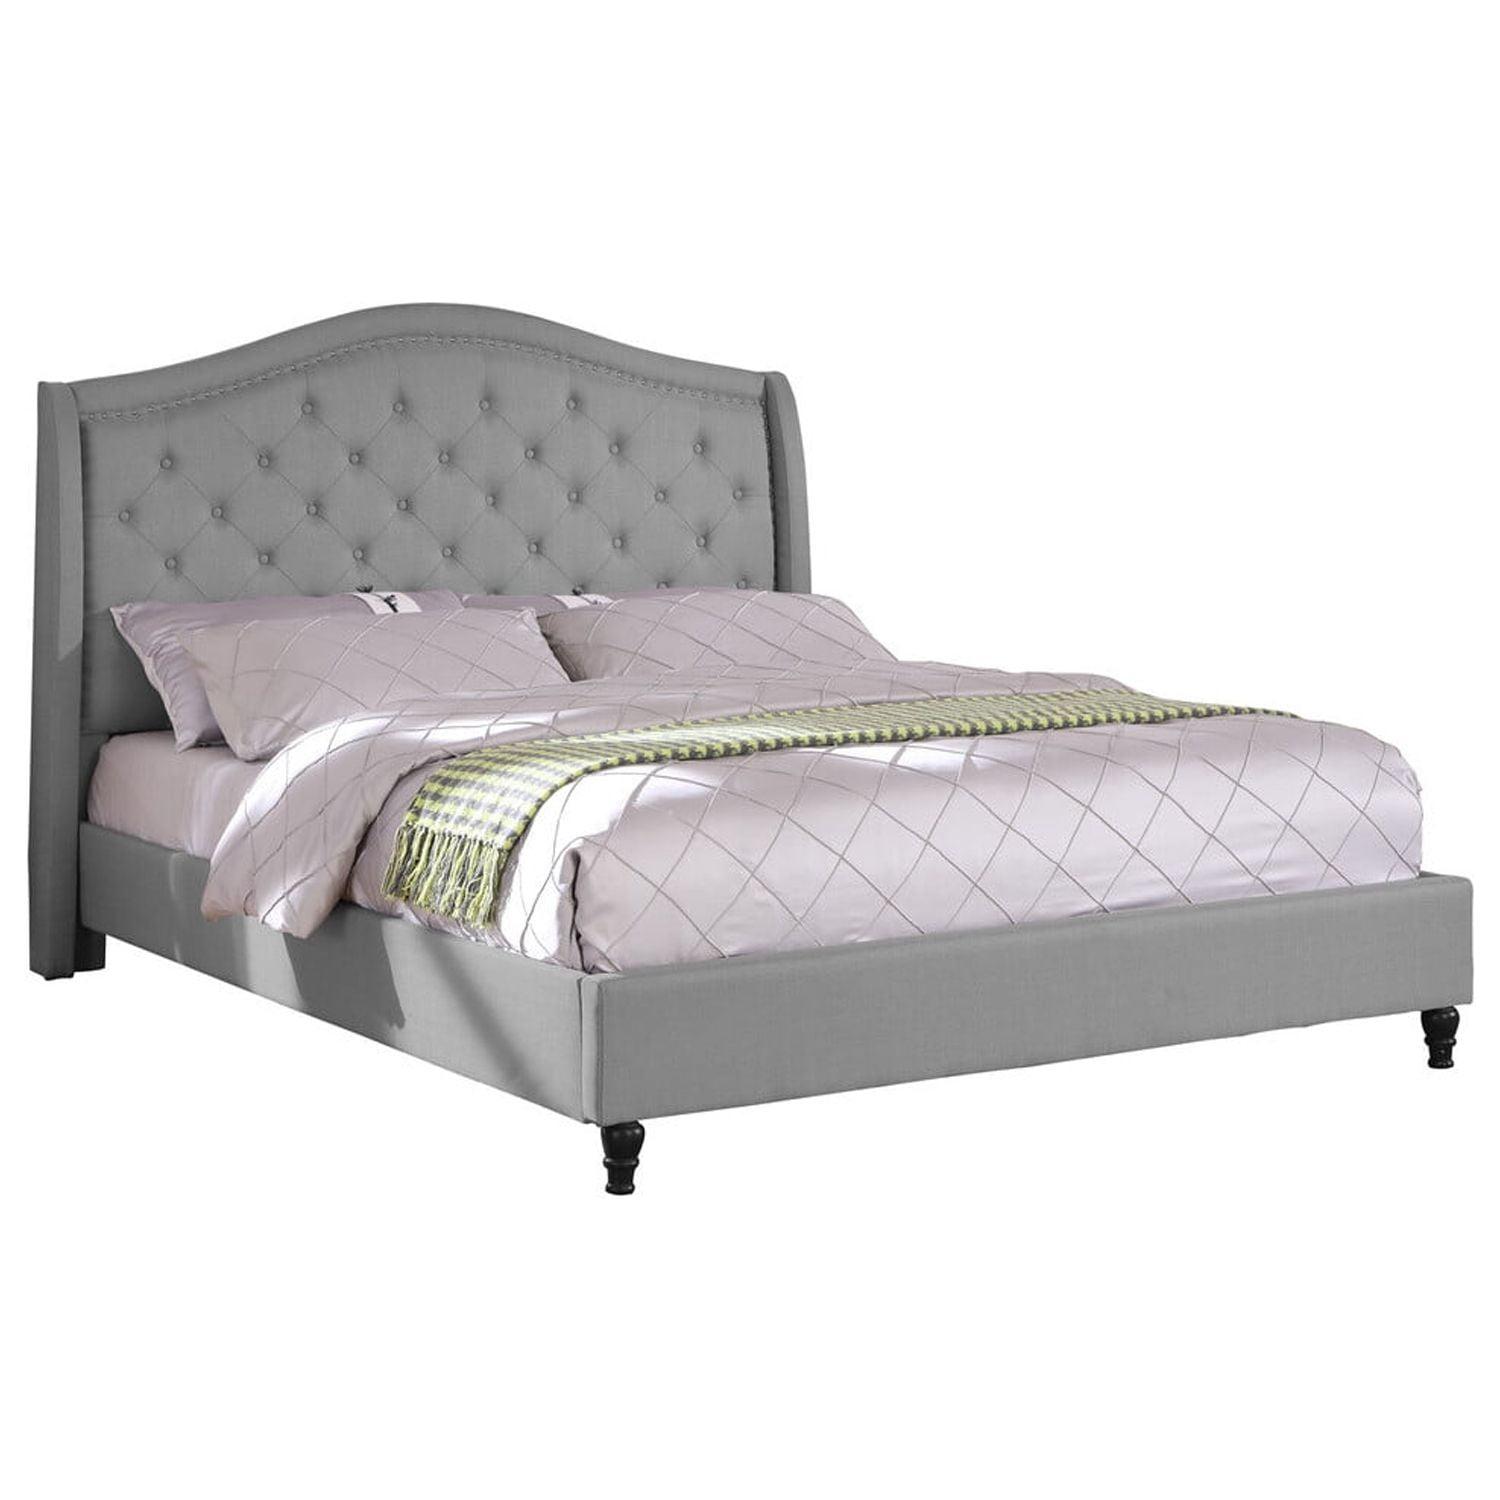 Elegant Pine Queen Platform Bed with Tufted Upholstery and Nailhead Trim